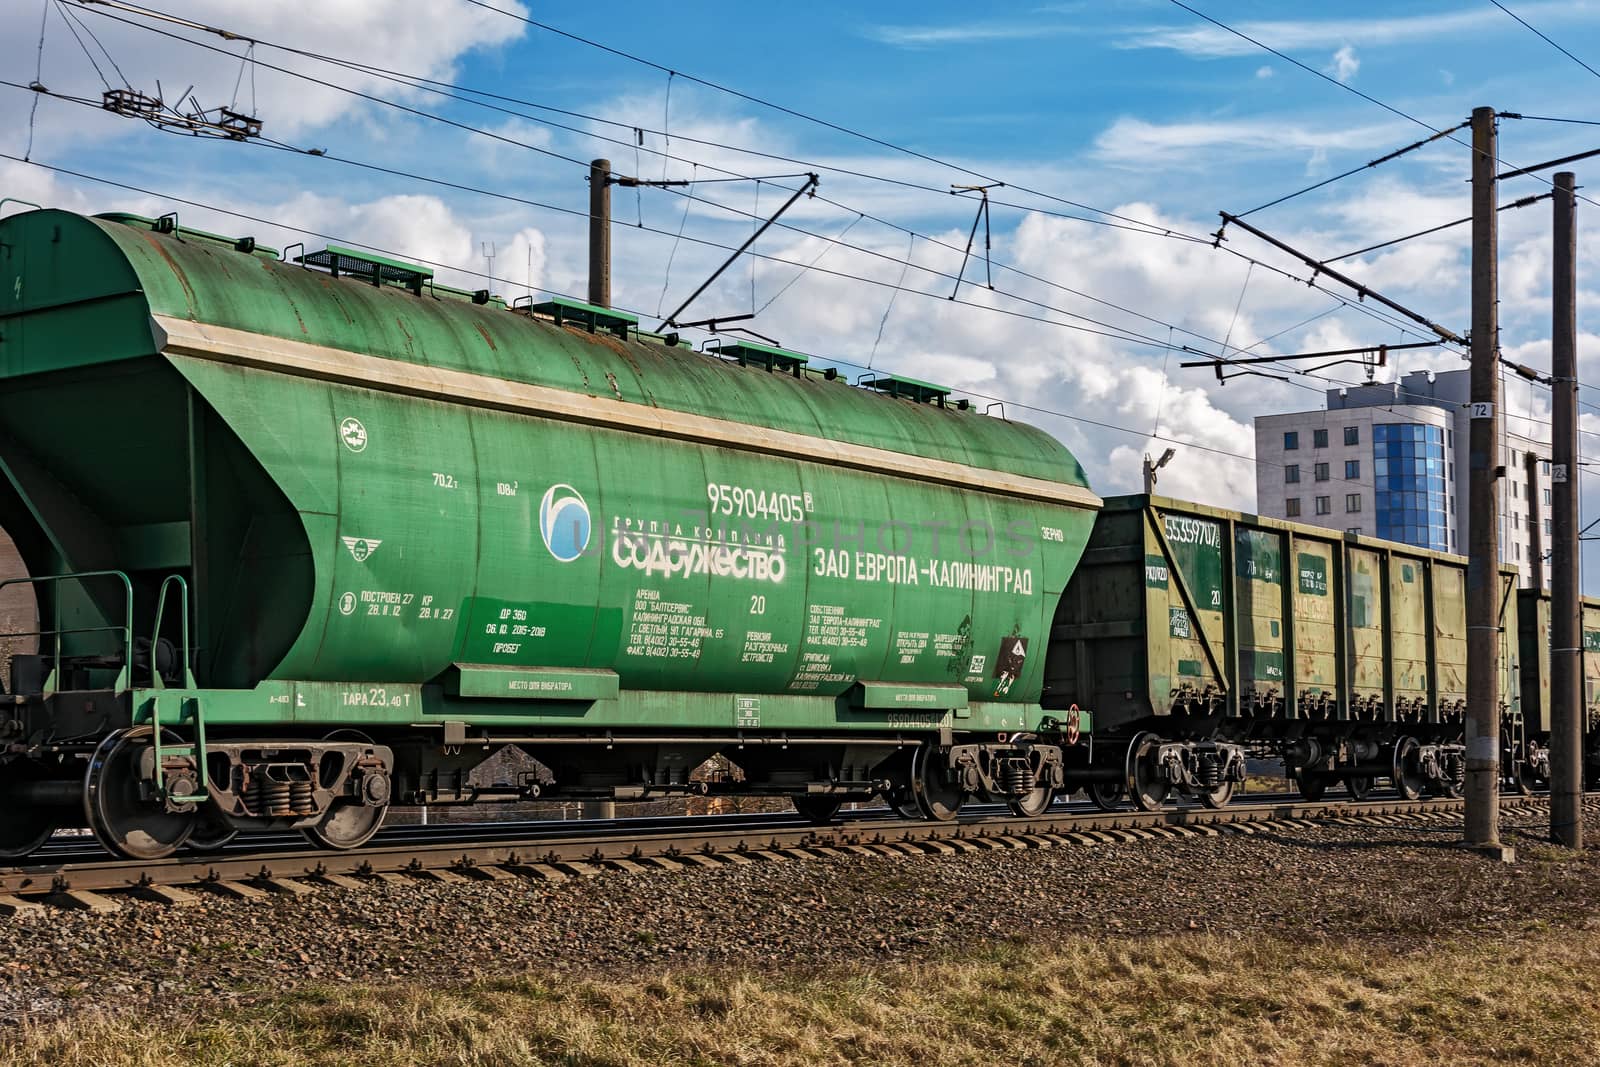 Locomotive of a freight train by Grommik